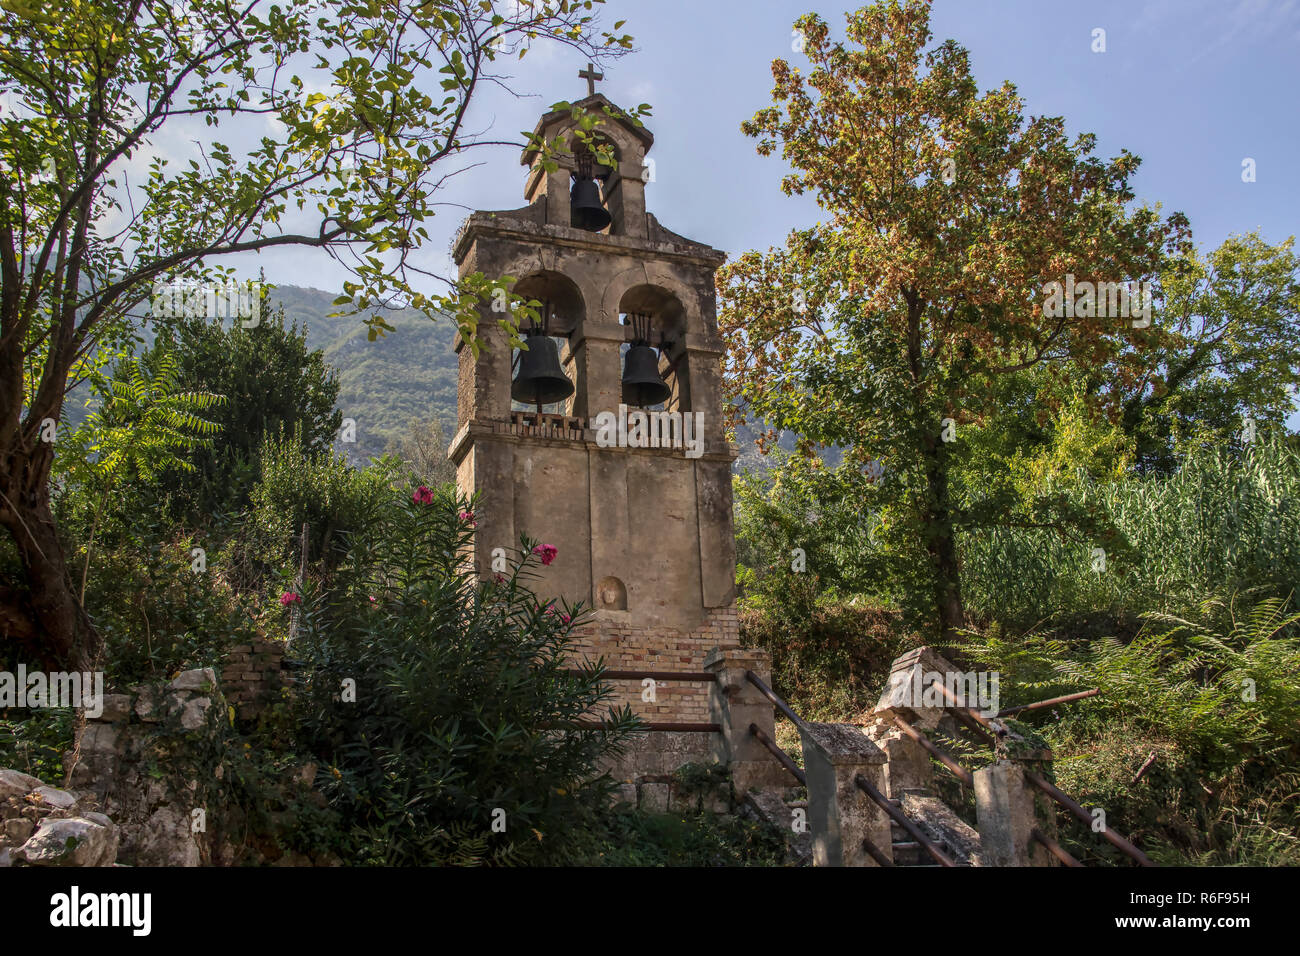 Montenegro - Bell tower in the courtyard of the Church of the Nativity of the Blessed Virgin Mary (Our Lady's Temple) in a coastal town of Prcanj Stock Photo